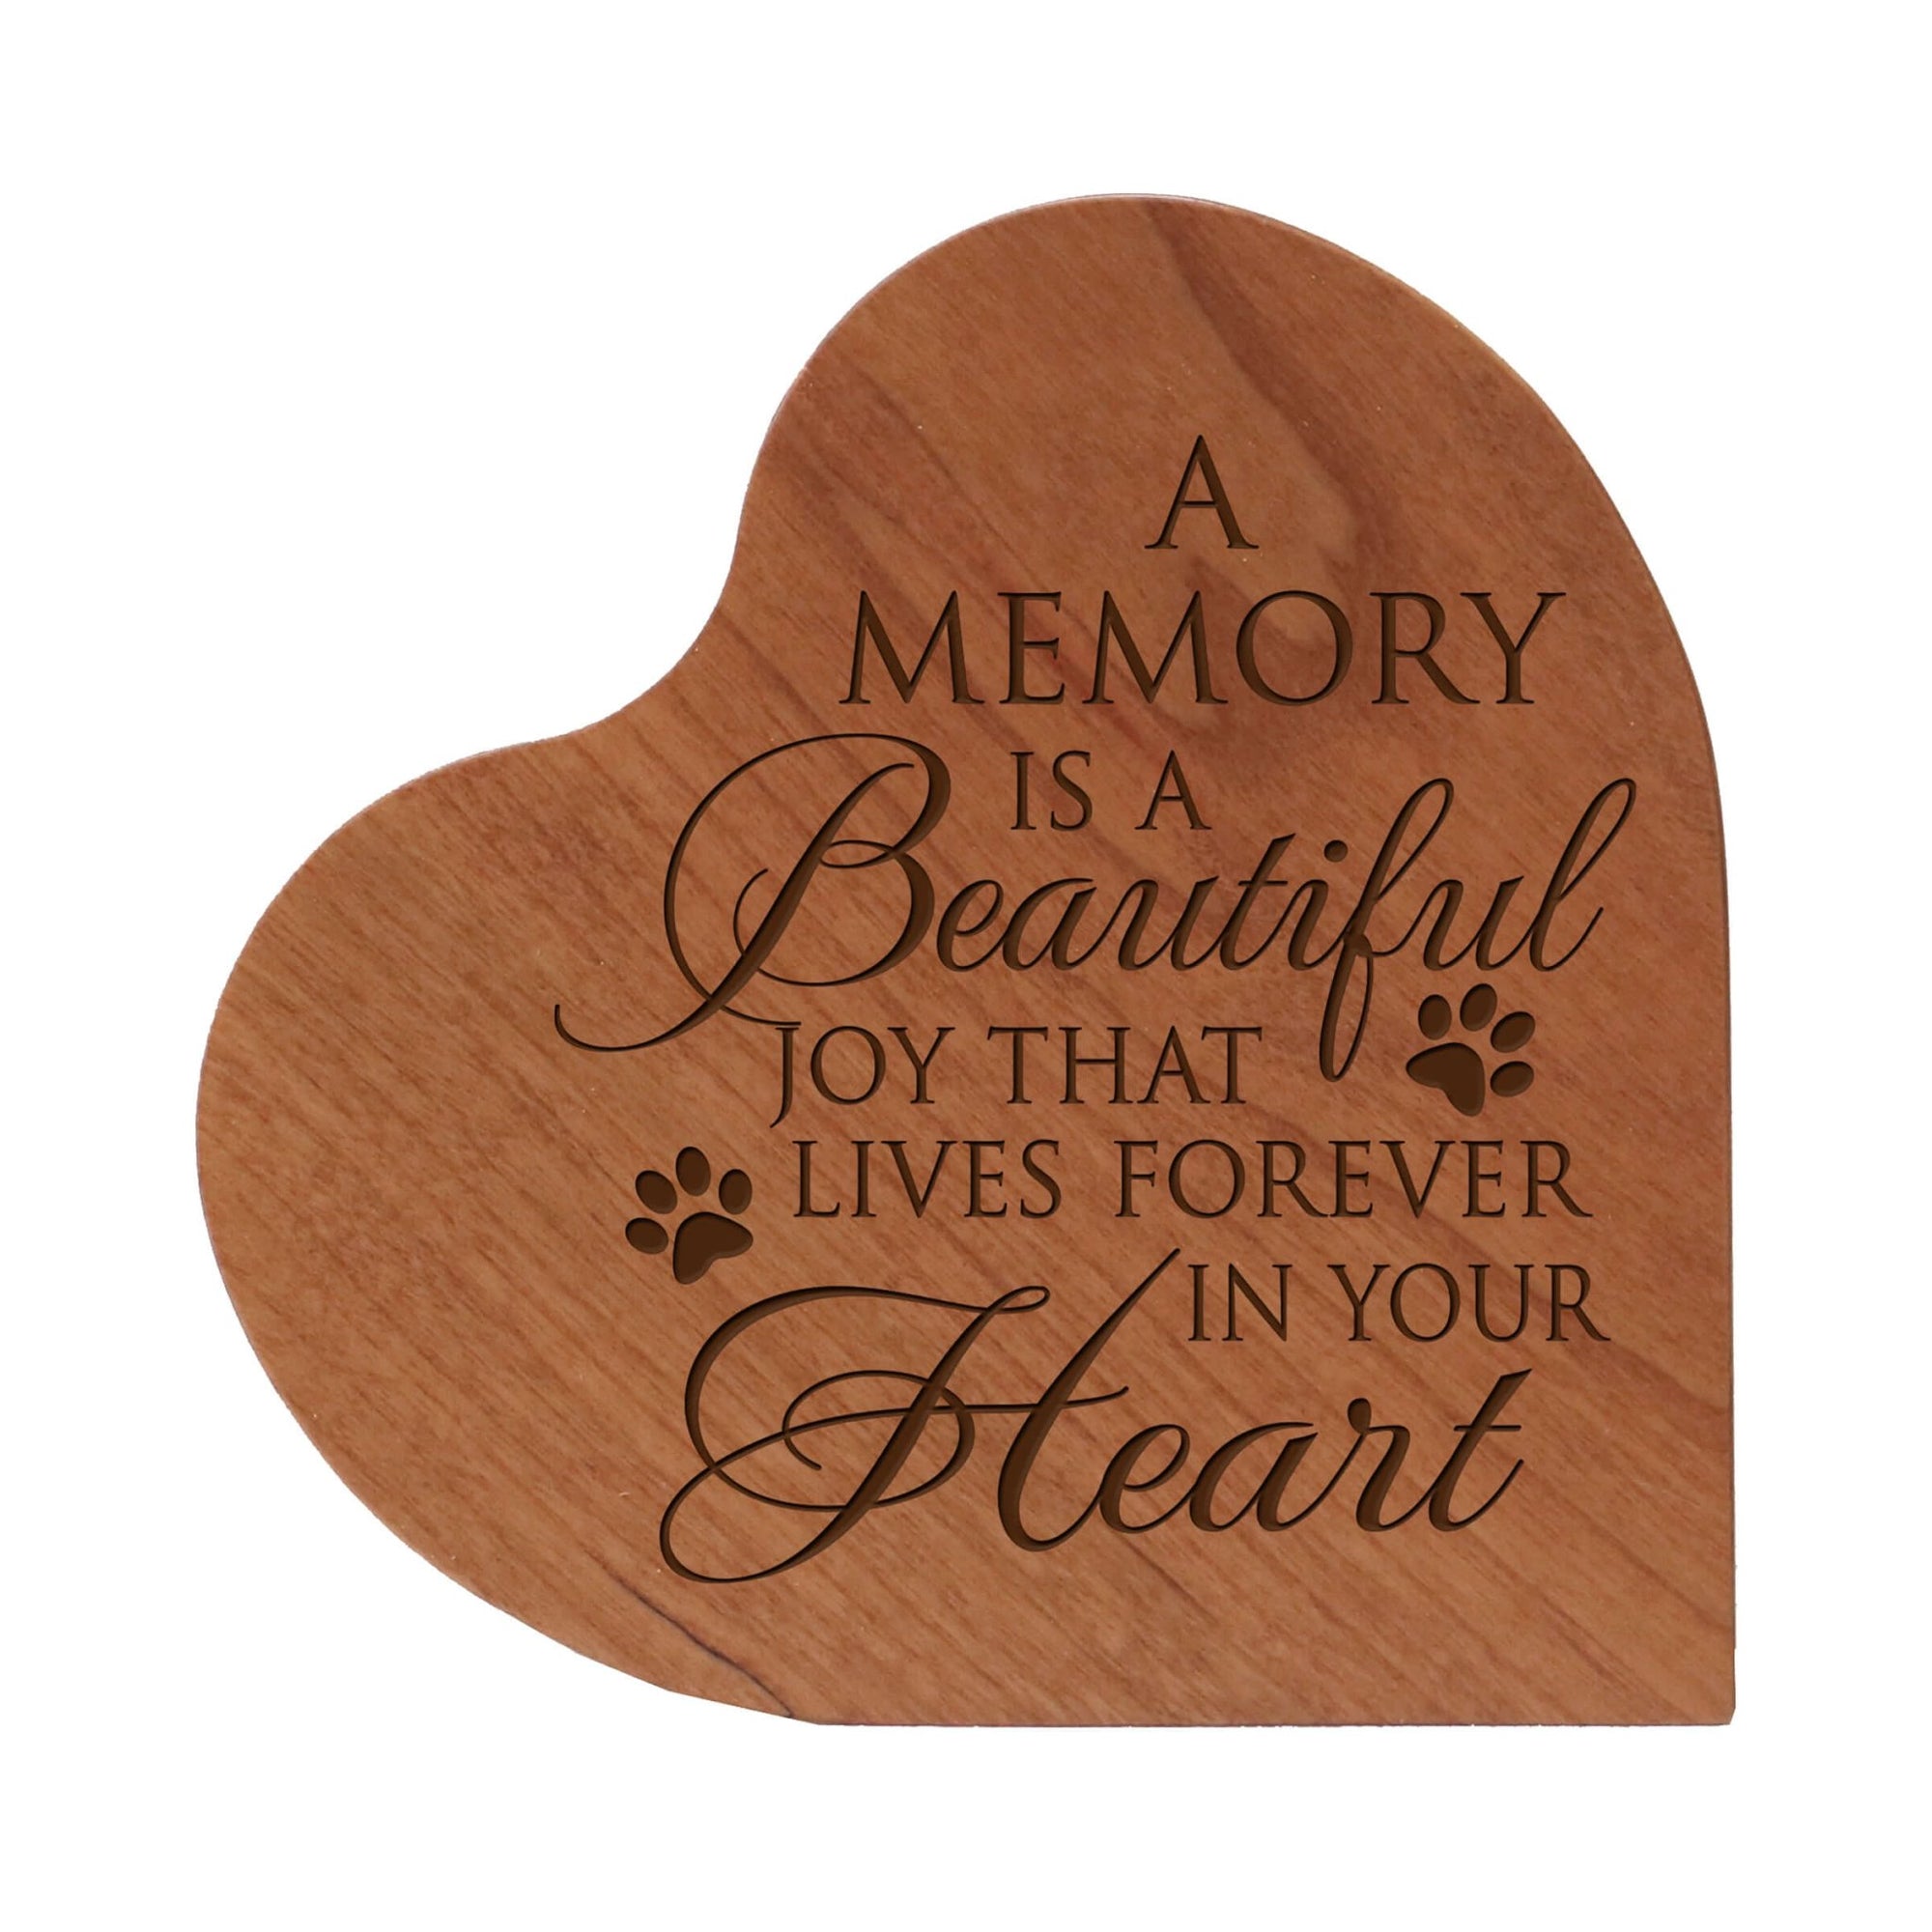 Personalized Small Heart Cremation Urn Keepsake For Pet Ashes - A Memory Is A Beautiful Joy - LifeSong Milestones